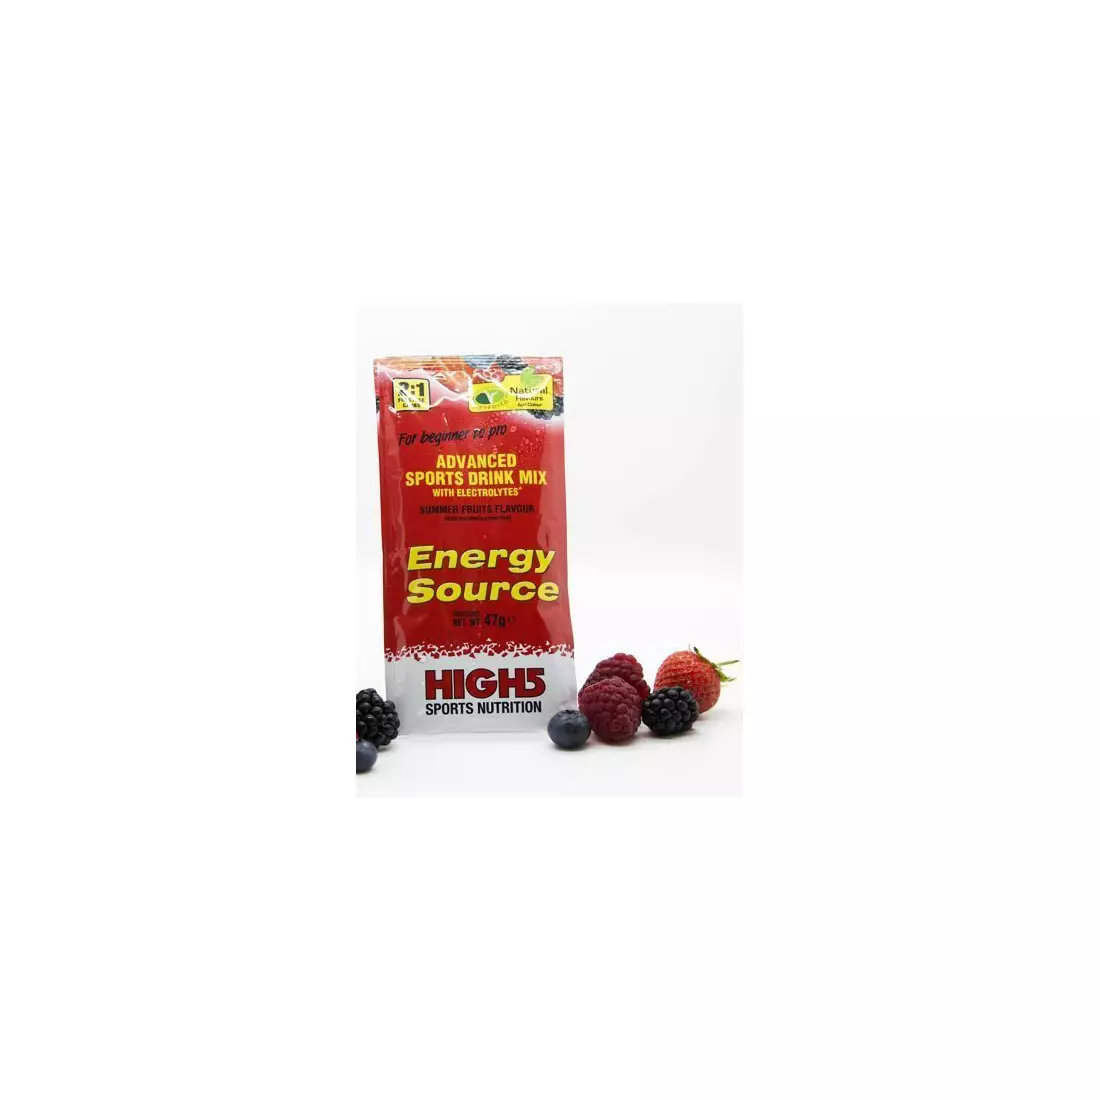 HIGH5 Isotonic isotonic drink powder to dissolve, sachet 47 g flavor: SUMMER FRUITS